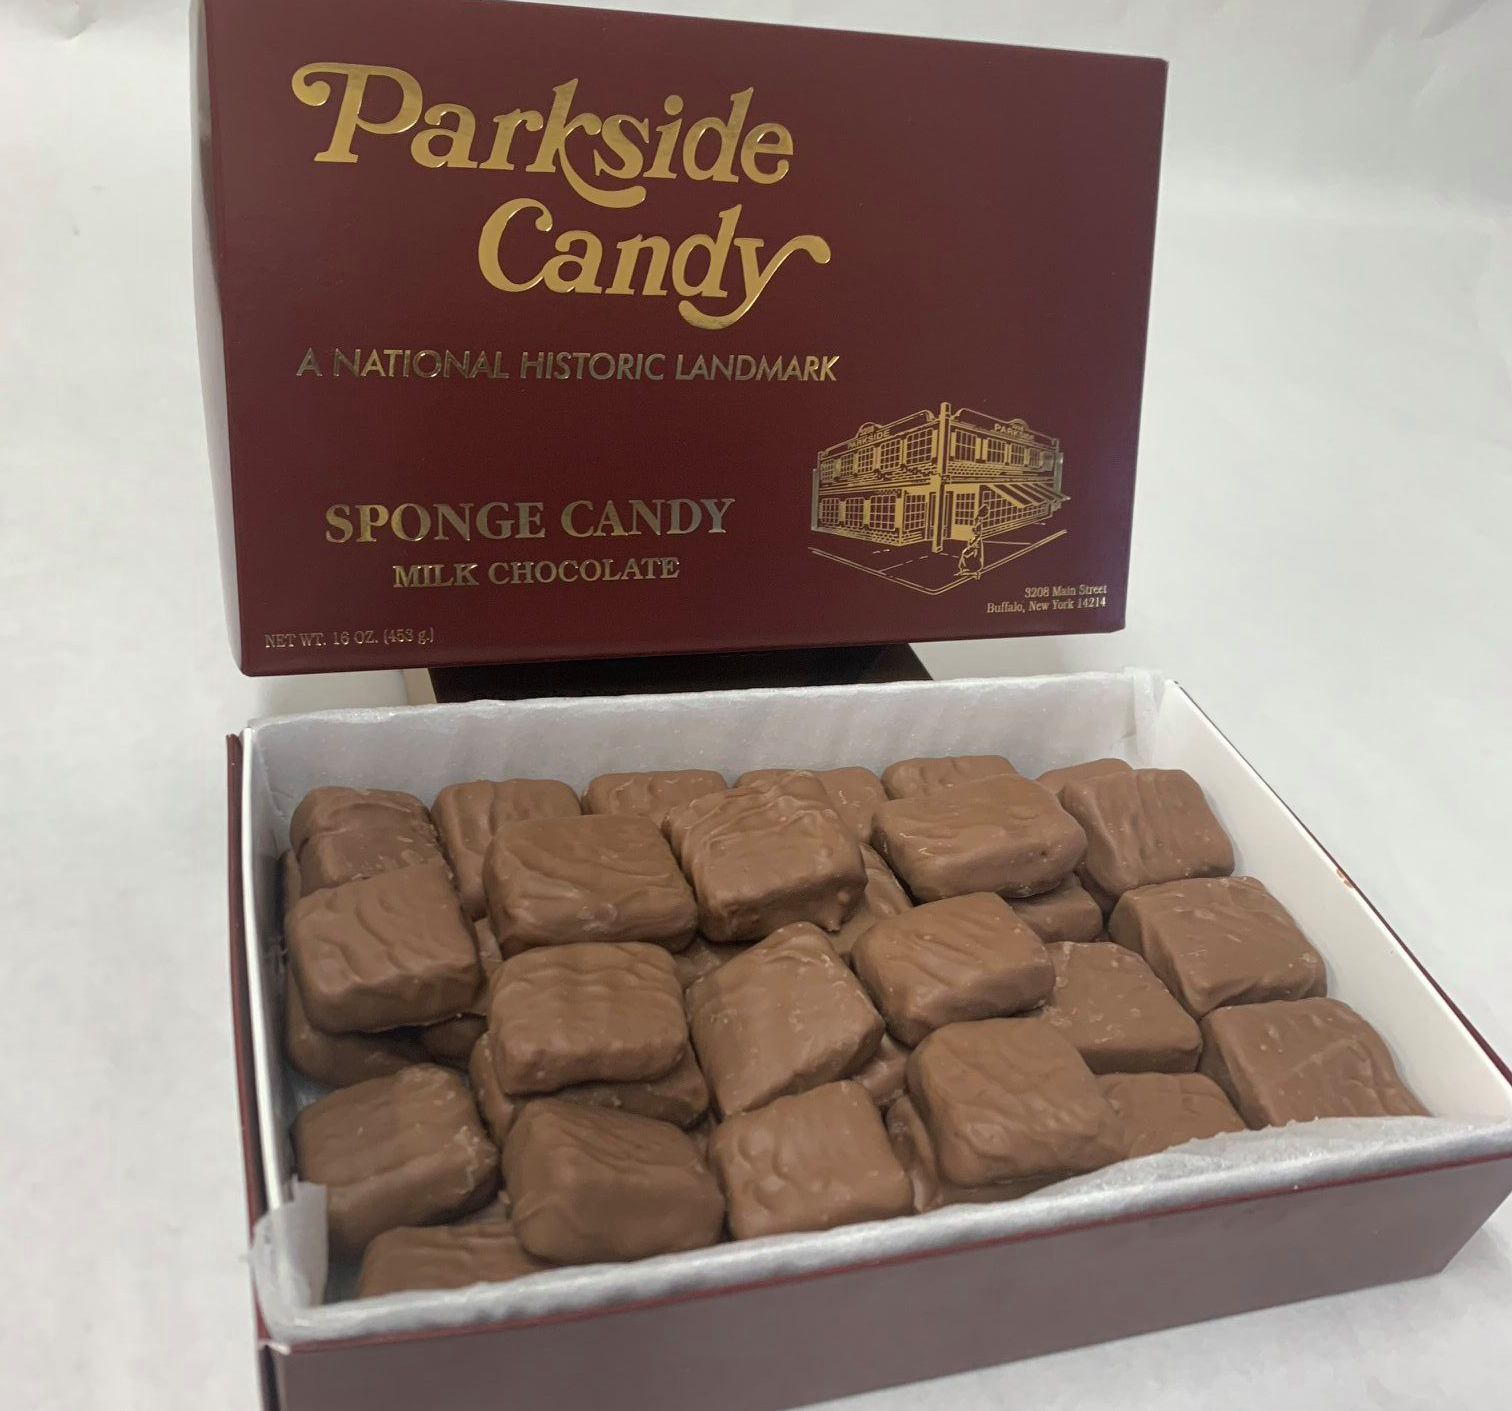 Parkside Candy